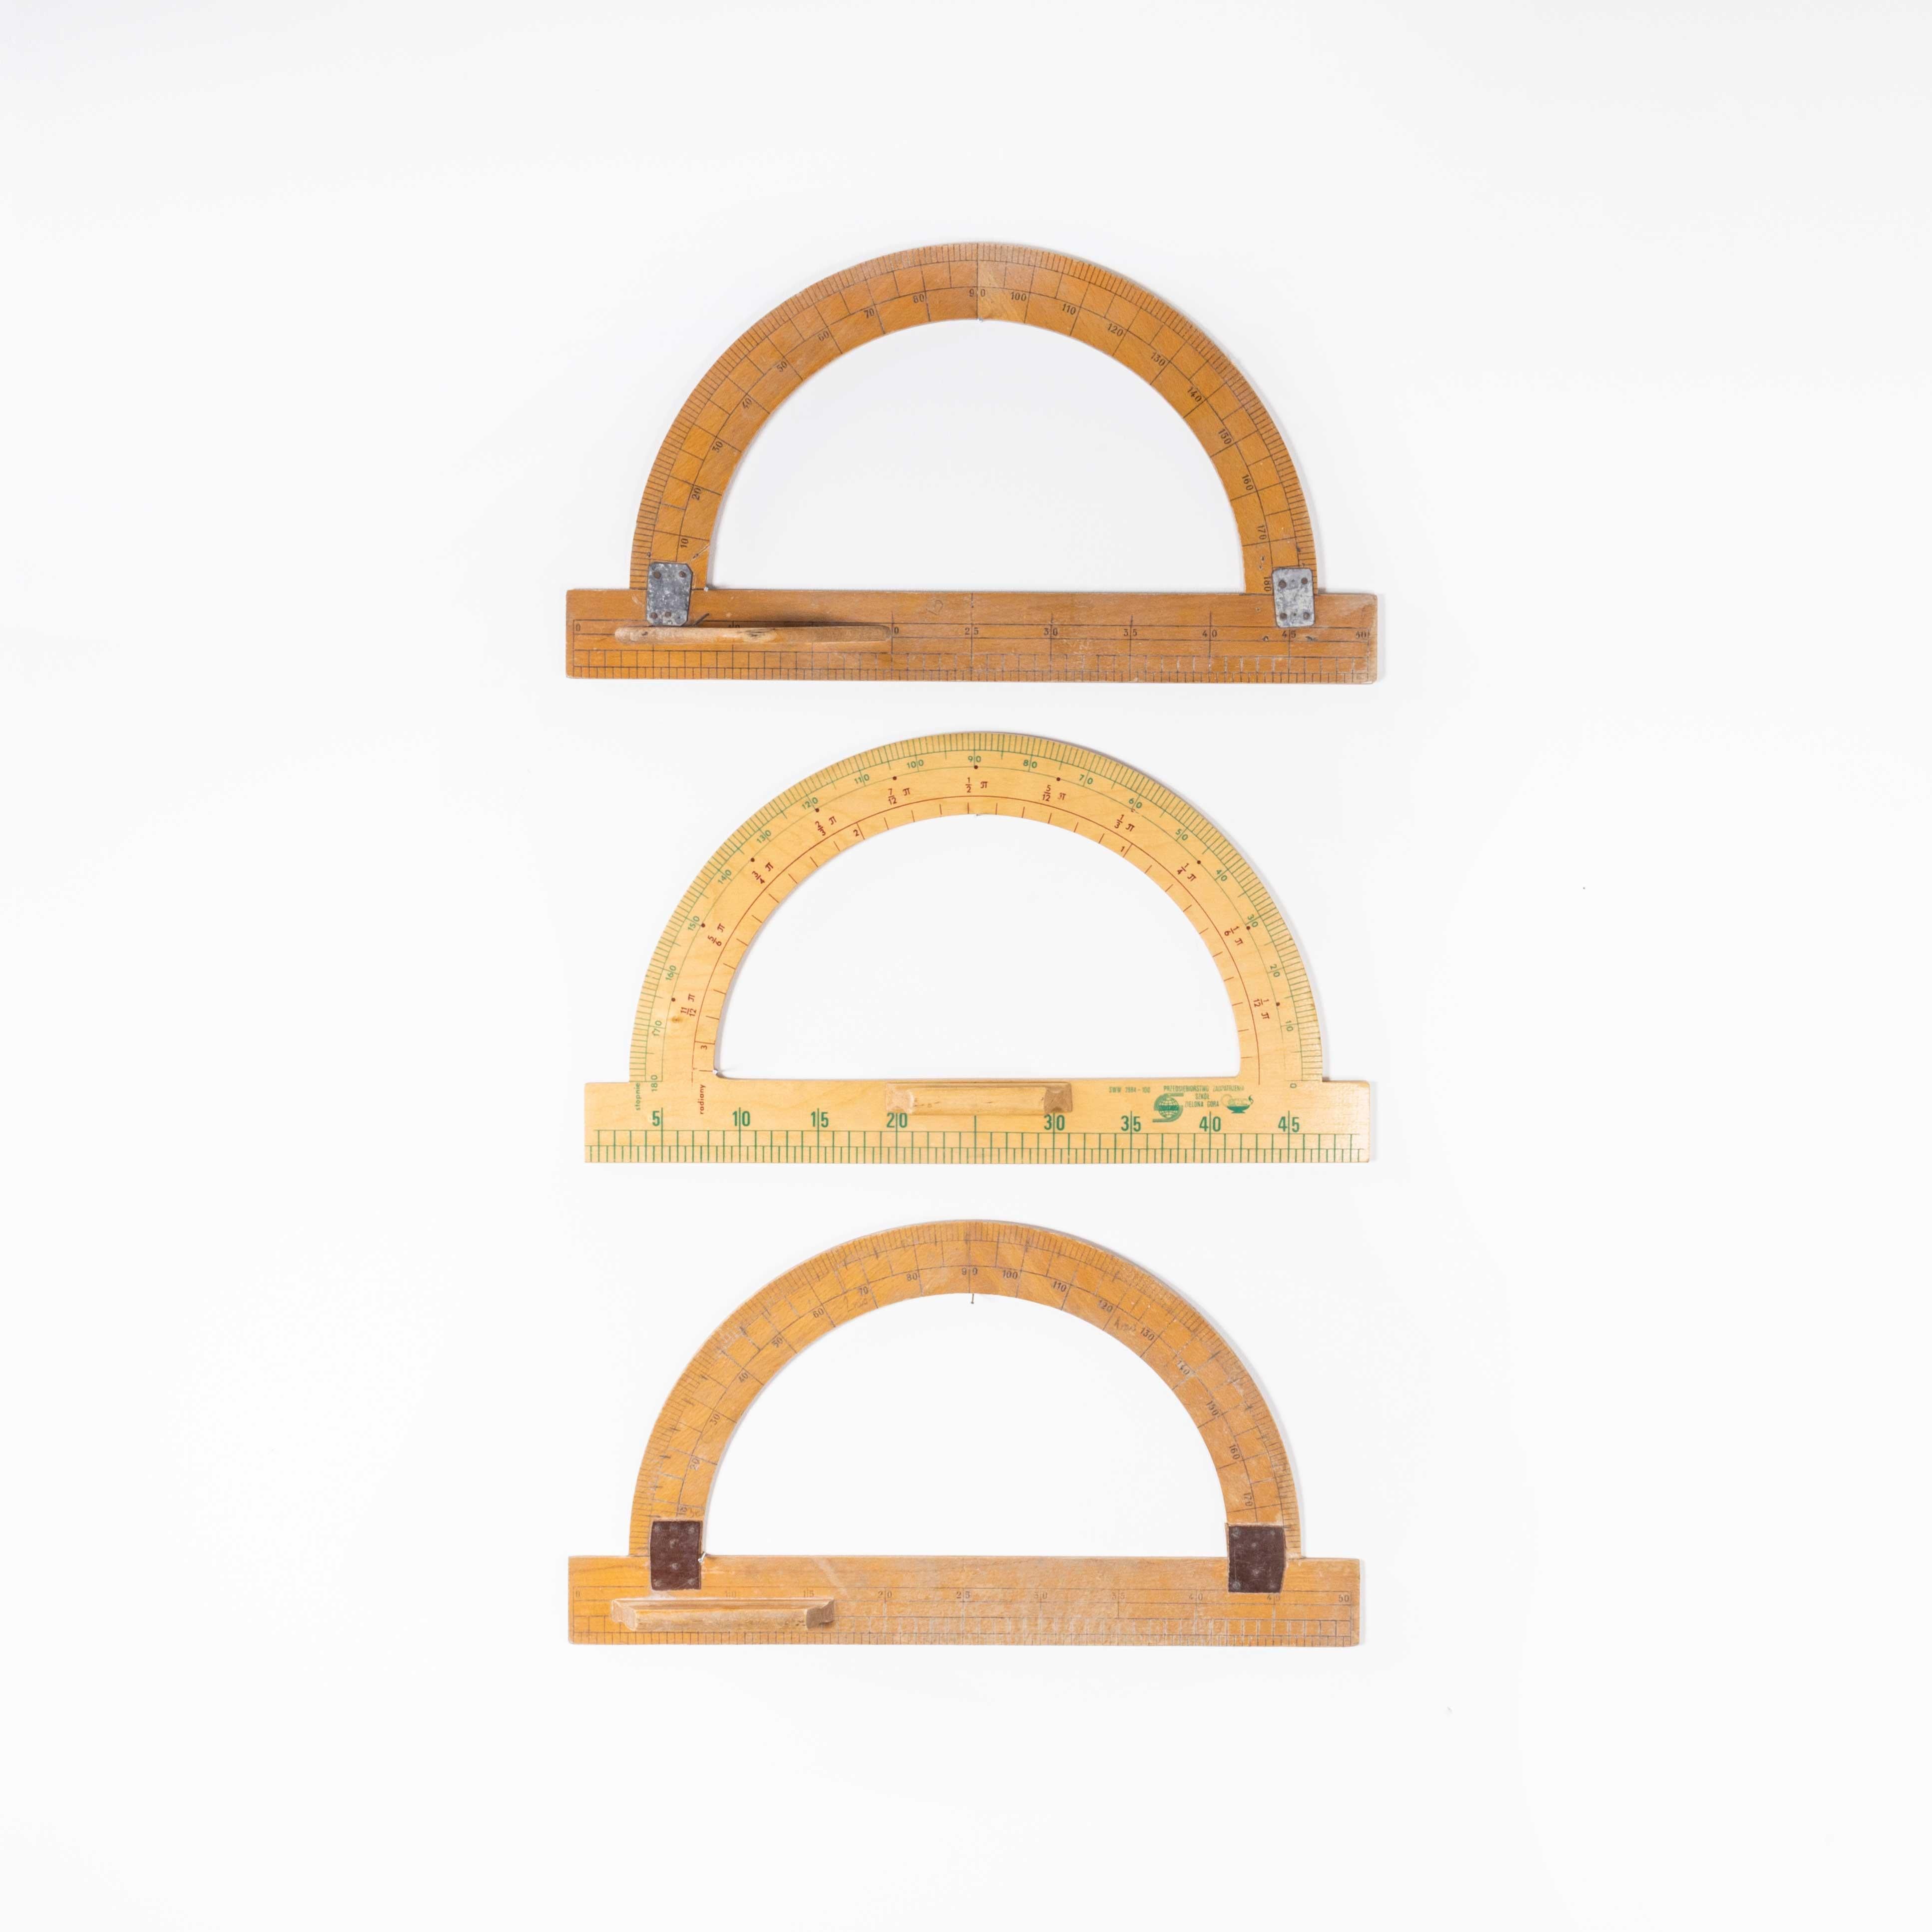 Set of three large semi cicular stationery oversize protractors
Set of three large semi circular stationery shapes. Three protractor shapes made of wood, each shape approximately 50 x 28cm.

WORKSHOP REPORT
Our workshop team inspect every